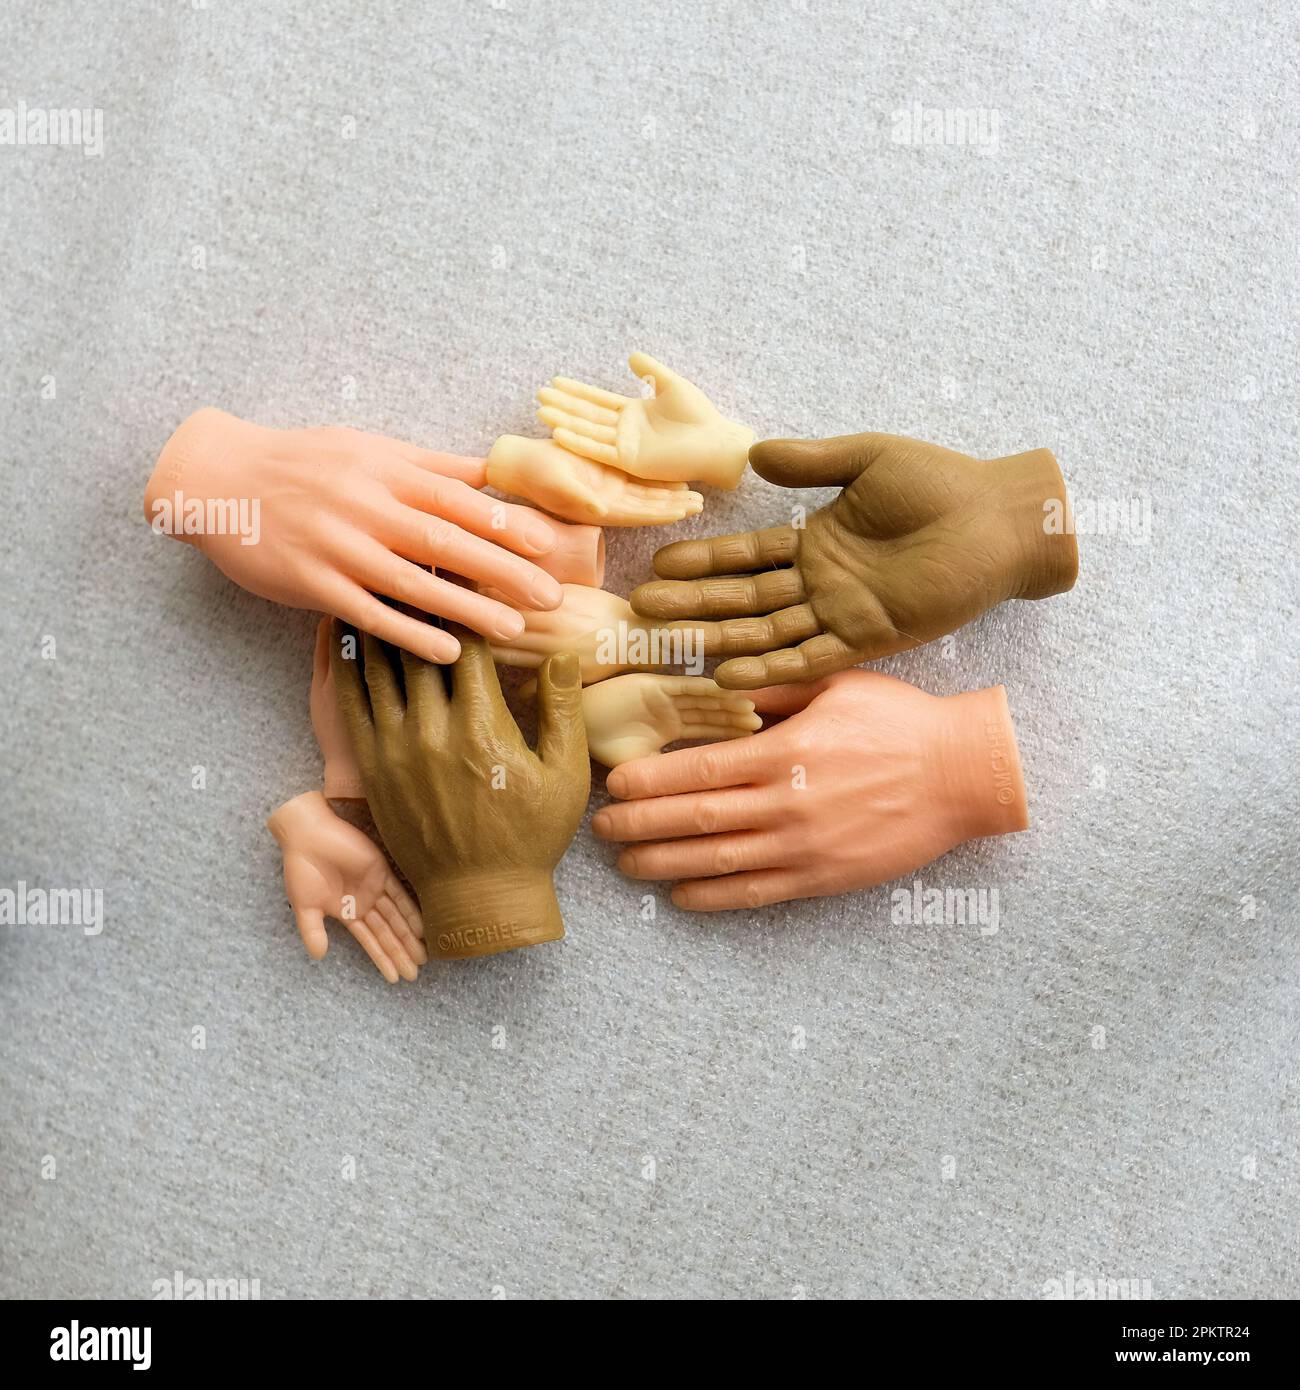 Plastic toy finger hands in different skin tones; help, assistance, harmony, diversity concept; tiny finger hands. Stock Photo